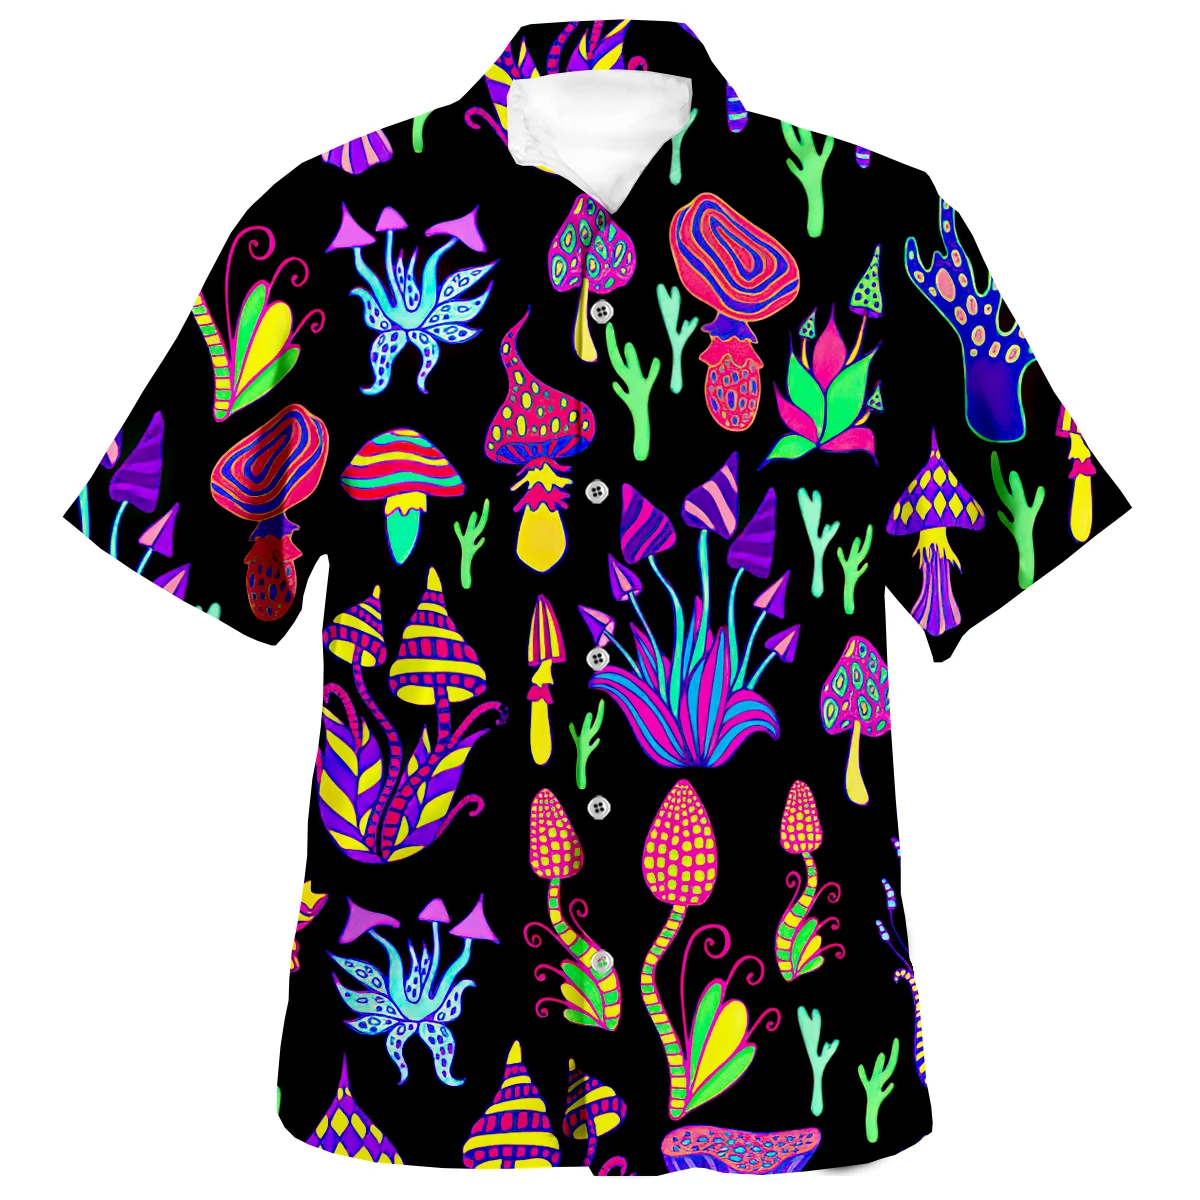 New Summer Psychedelic Mushroom 3d Printed Hip-hop Shirt Casual Loose Plus Size Men's And Women's Fashion Beach Party Trend